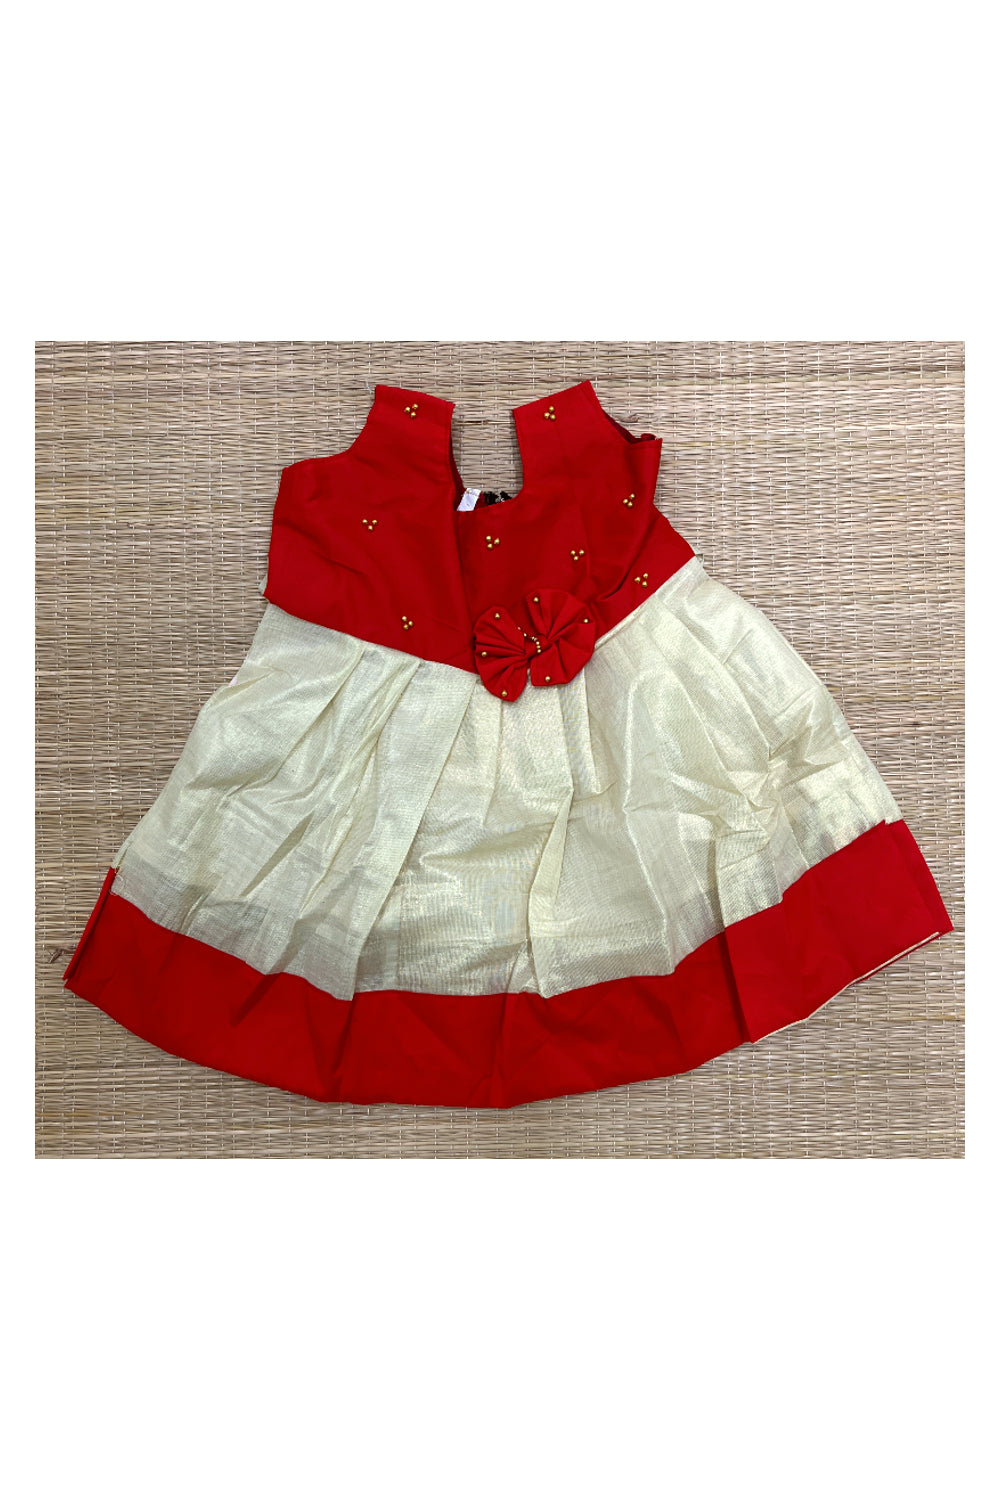 Southloom Kerala Tissue Frock with Red Bead Work Designs for Kids (1 Year)